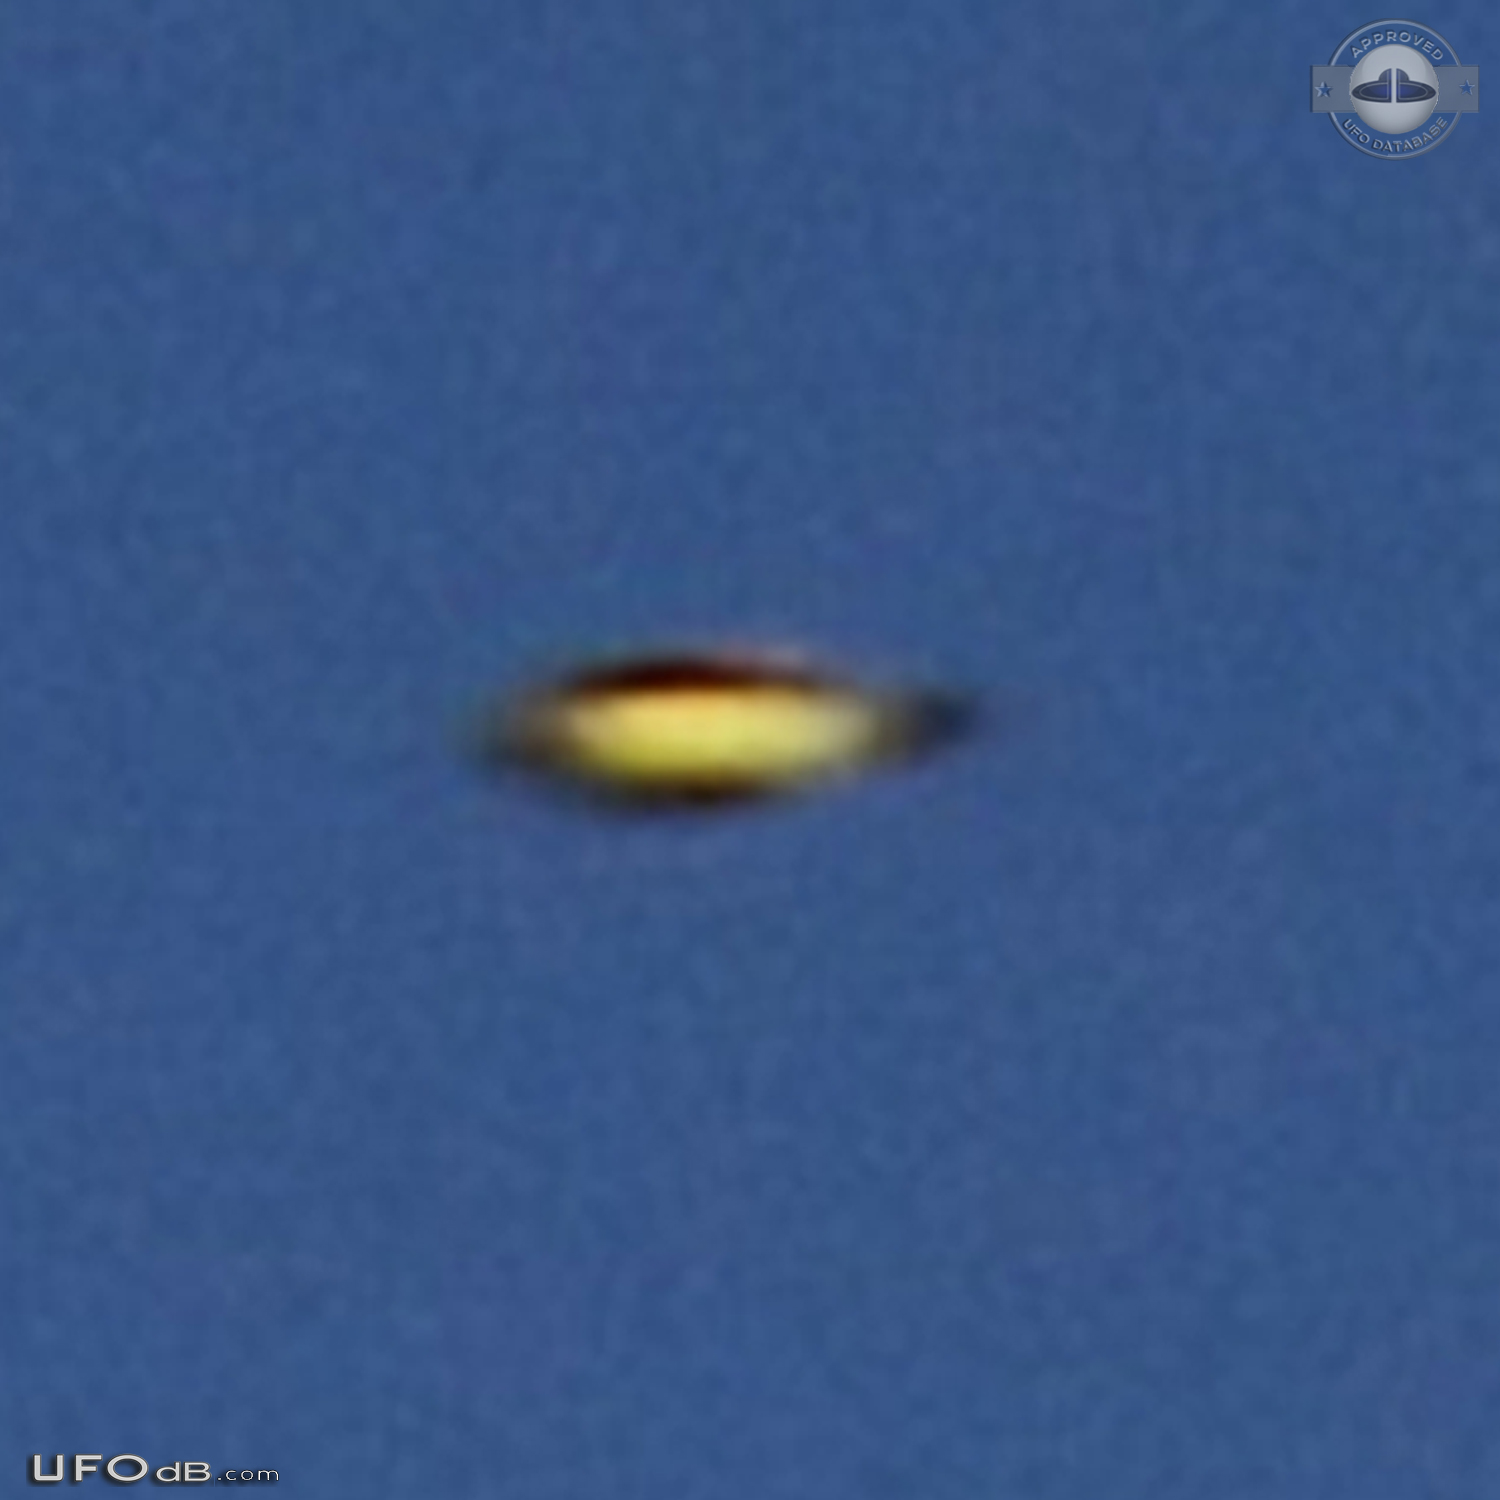 UFO Expert Captures Close Encounter With Disk-Shaped UFO 2015 UFO Picture #684-3